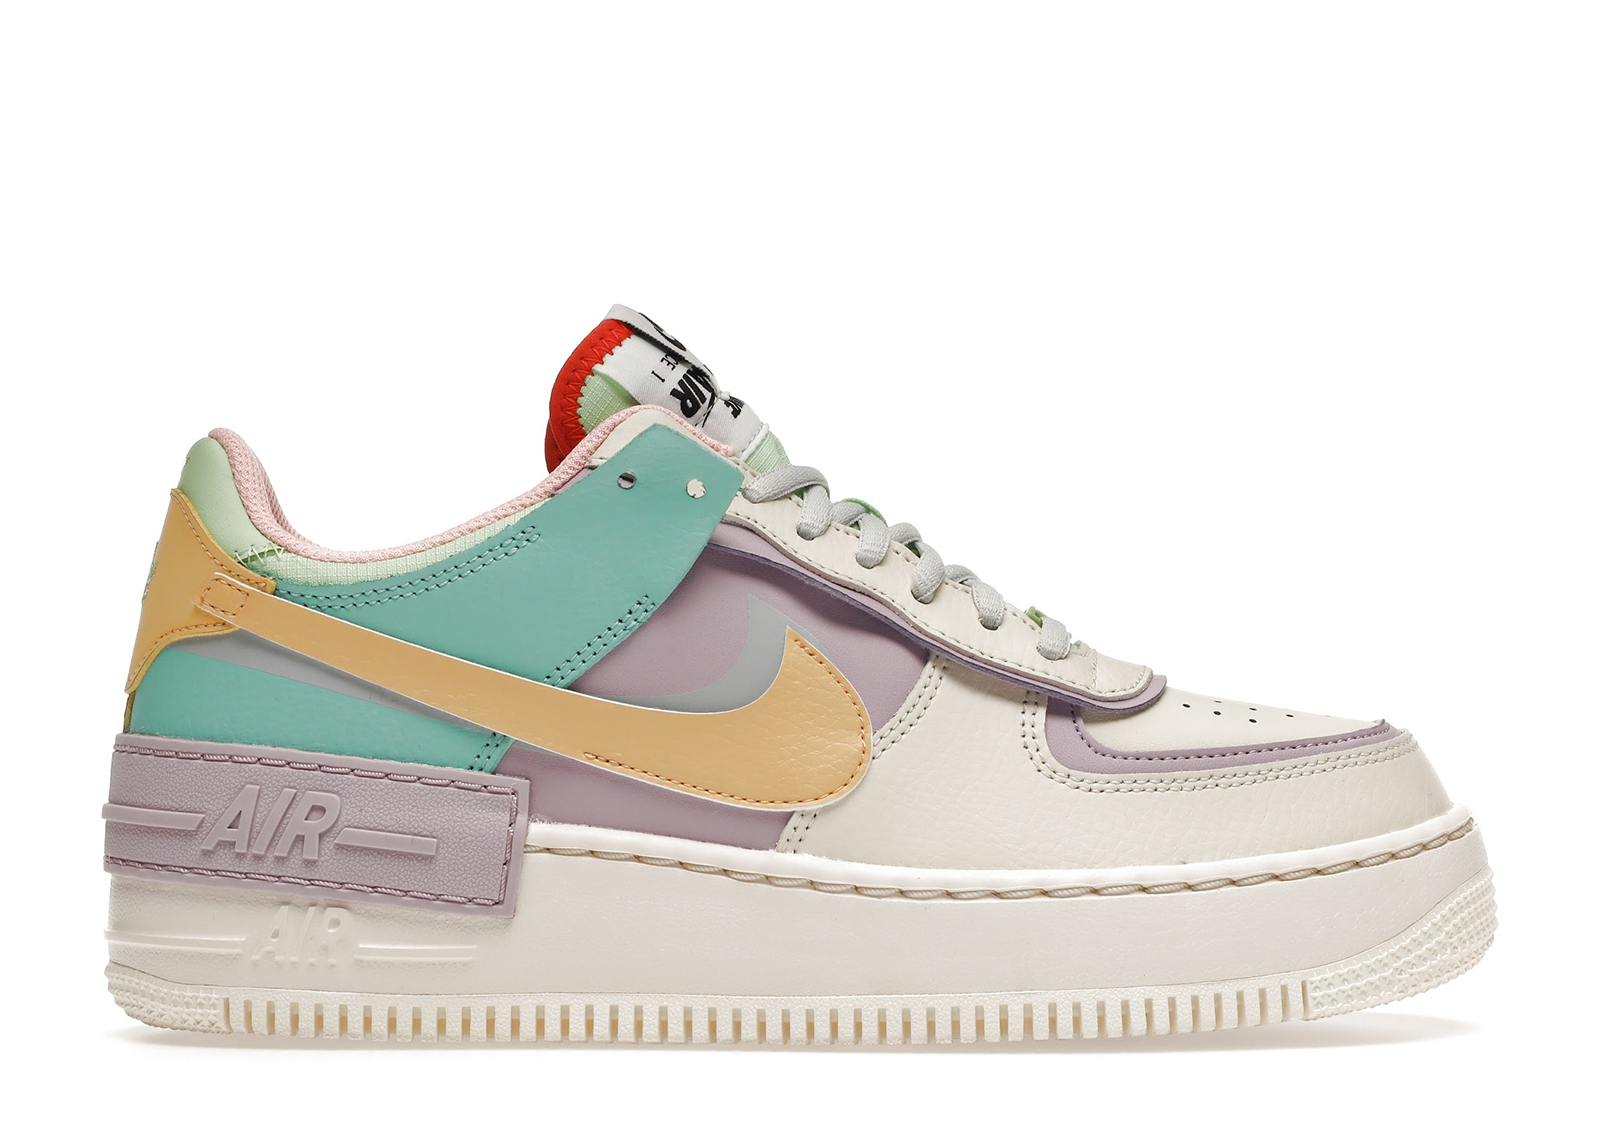 Nike Air Force 1 Low Shadow Pale Ivory (Women's)